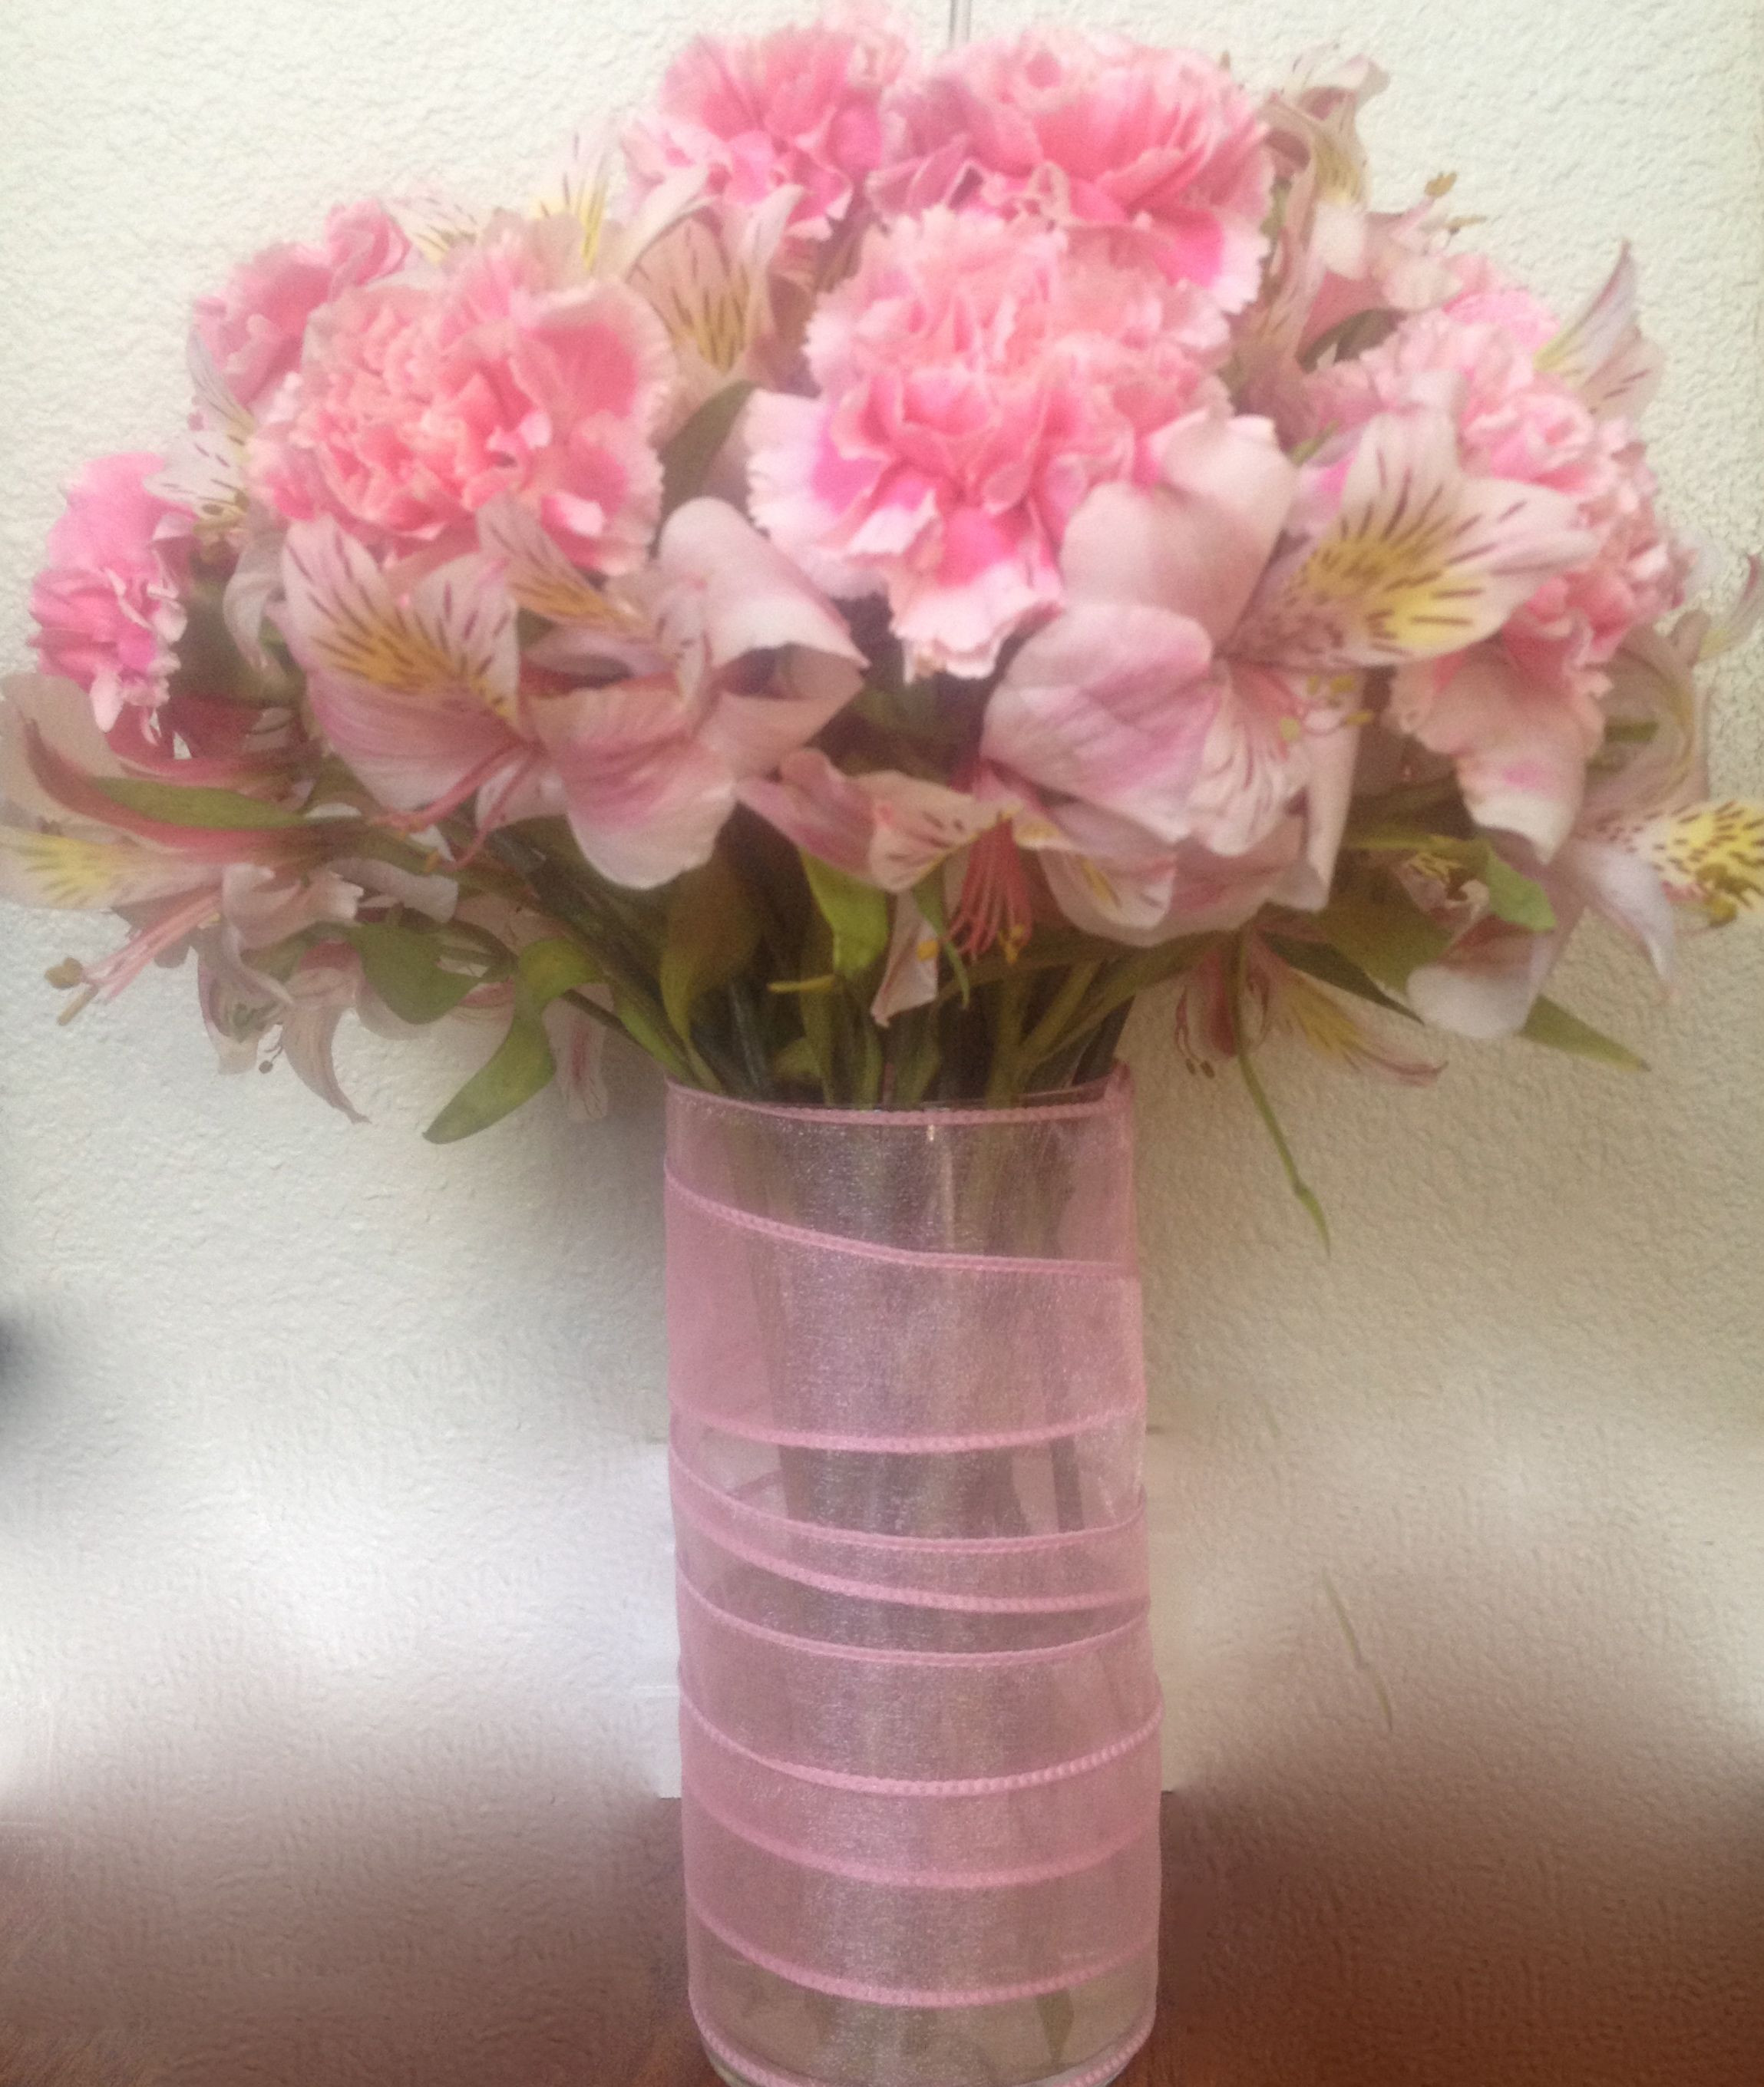 28 Wonderful 8 Inch Wide Cylinder Vase 2024 free download 8 inch wide cylinder vase of its a girl pink carnations alstroemeria in a glass vase wrapped inside pink carnations alstroemeria in a glass vase wrapped in pink ribbon